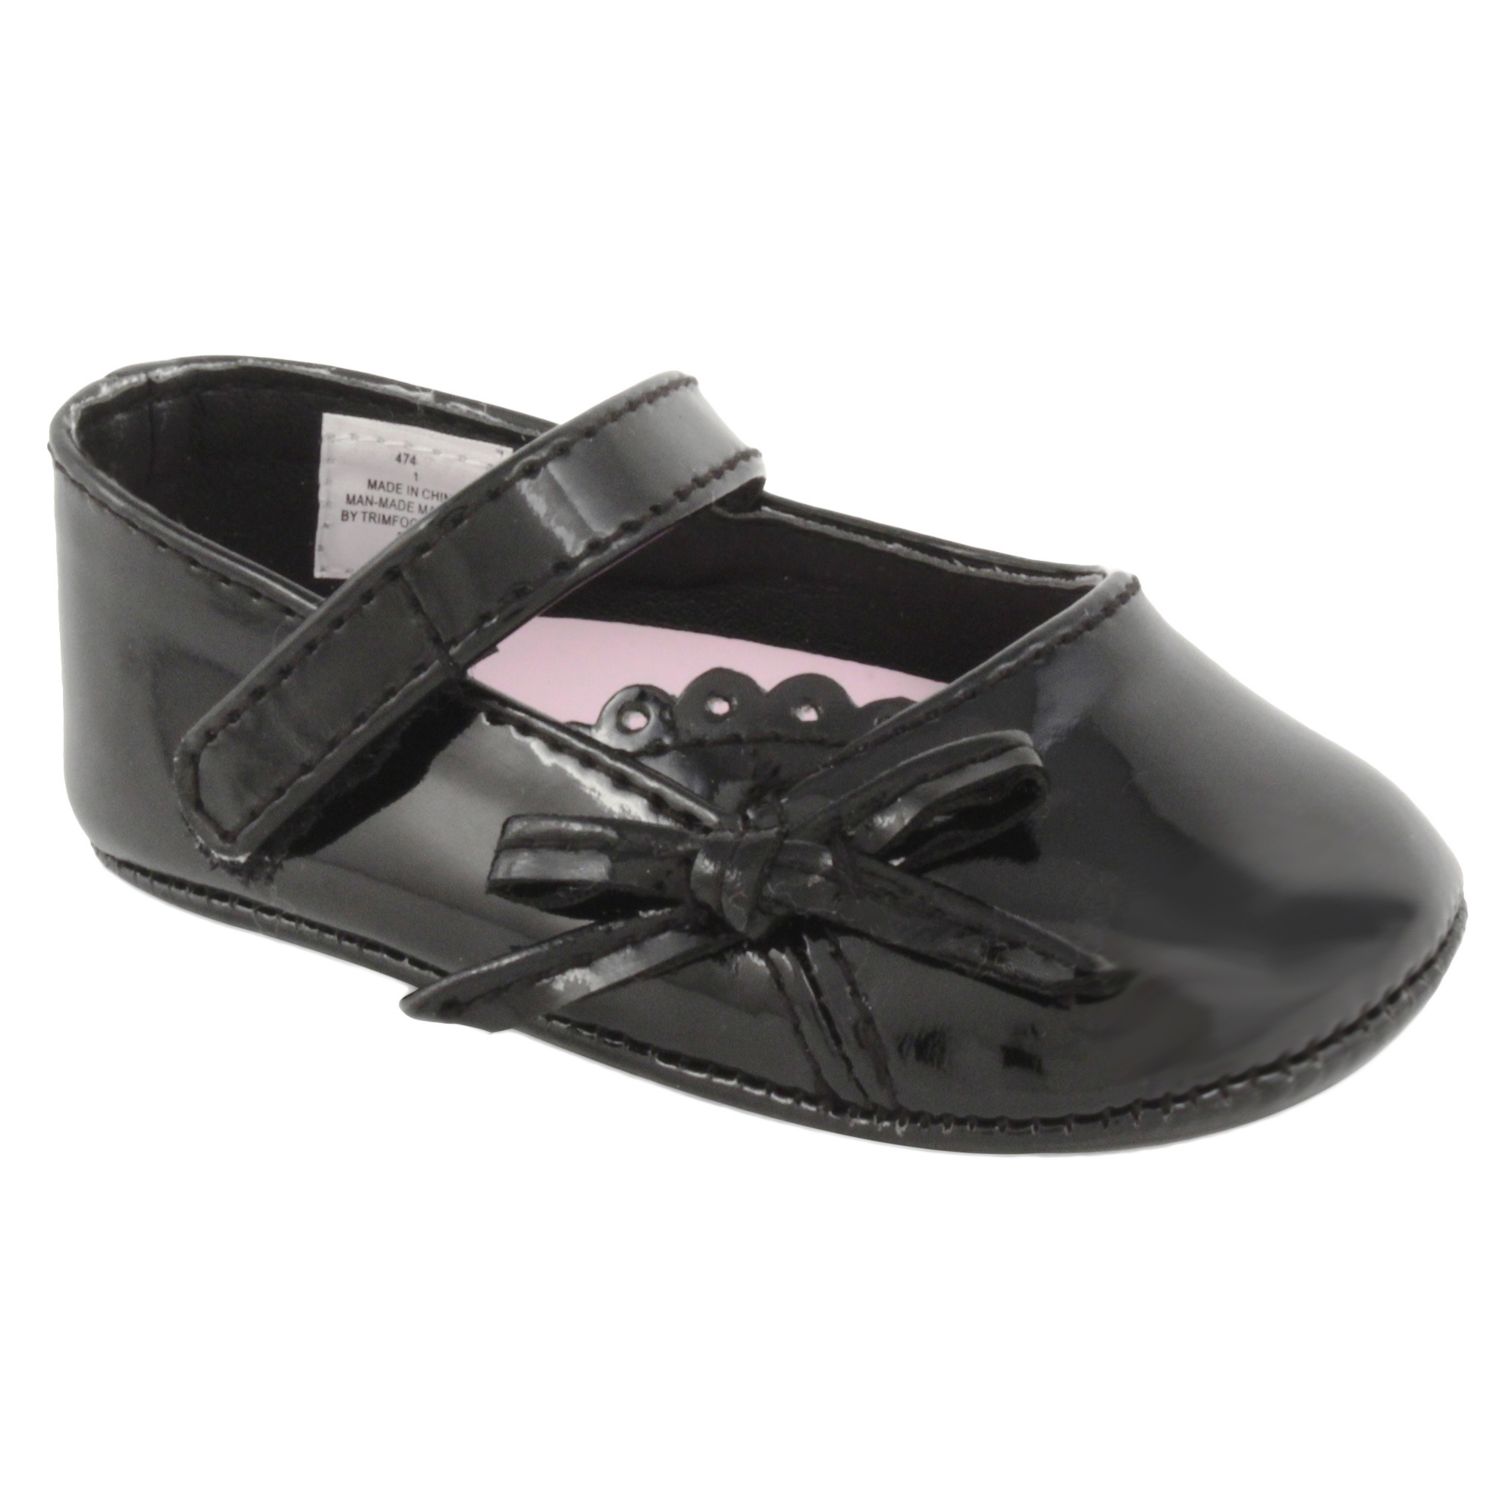 infant white patent leather shoes